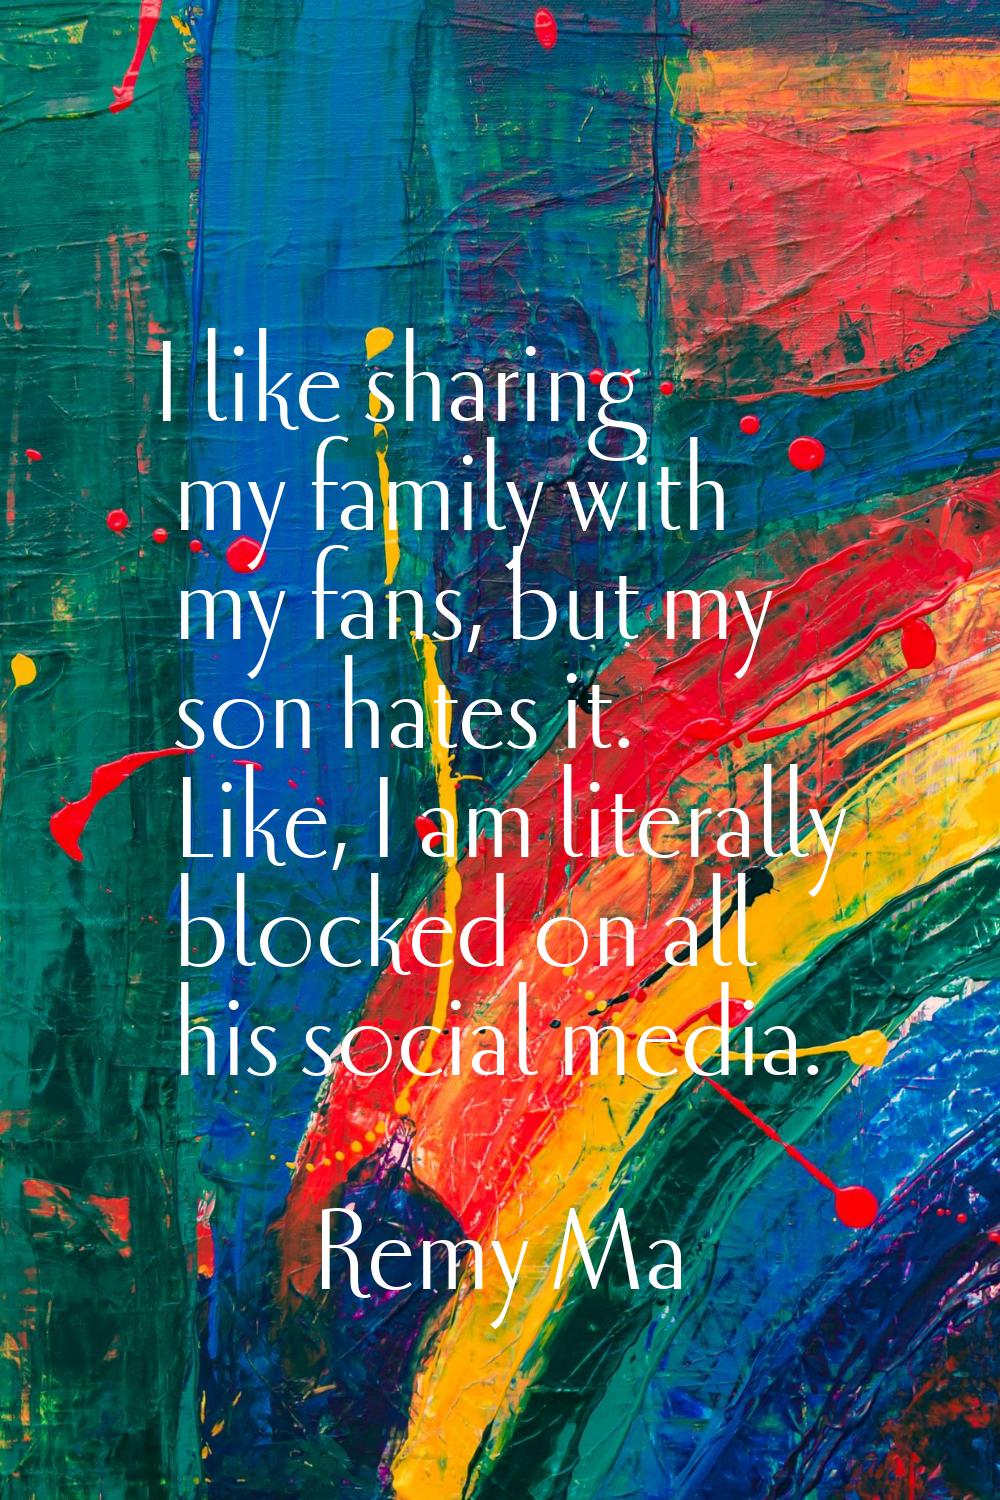 I like sharing my family with my fans, but my son hates it. Like, I am literally blocked on all his